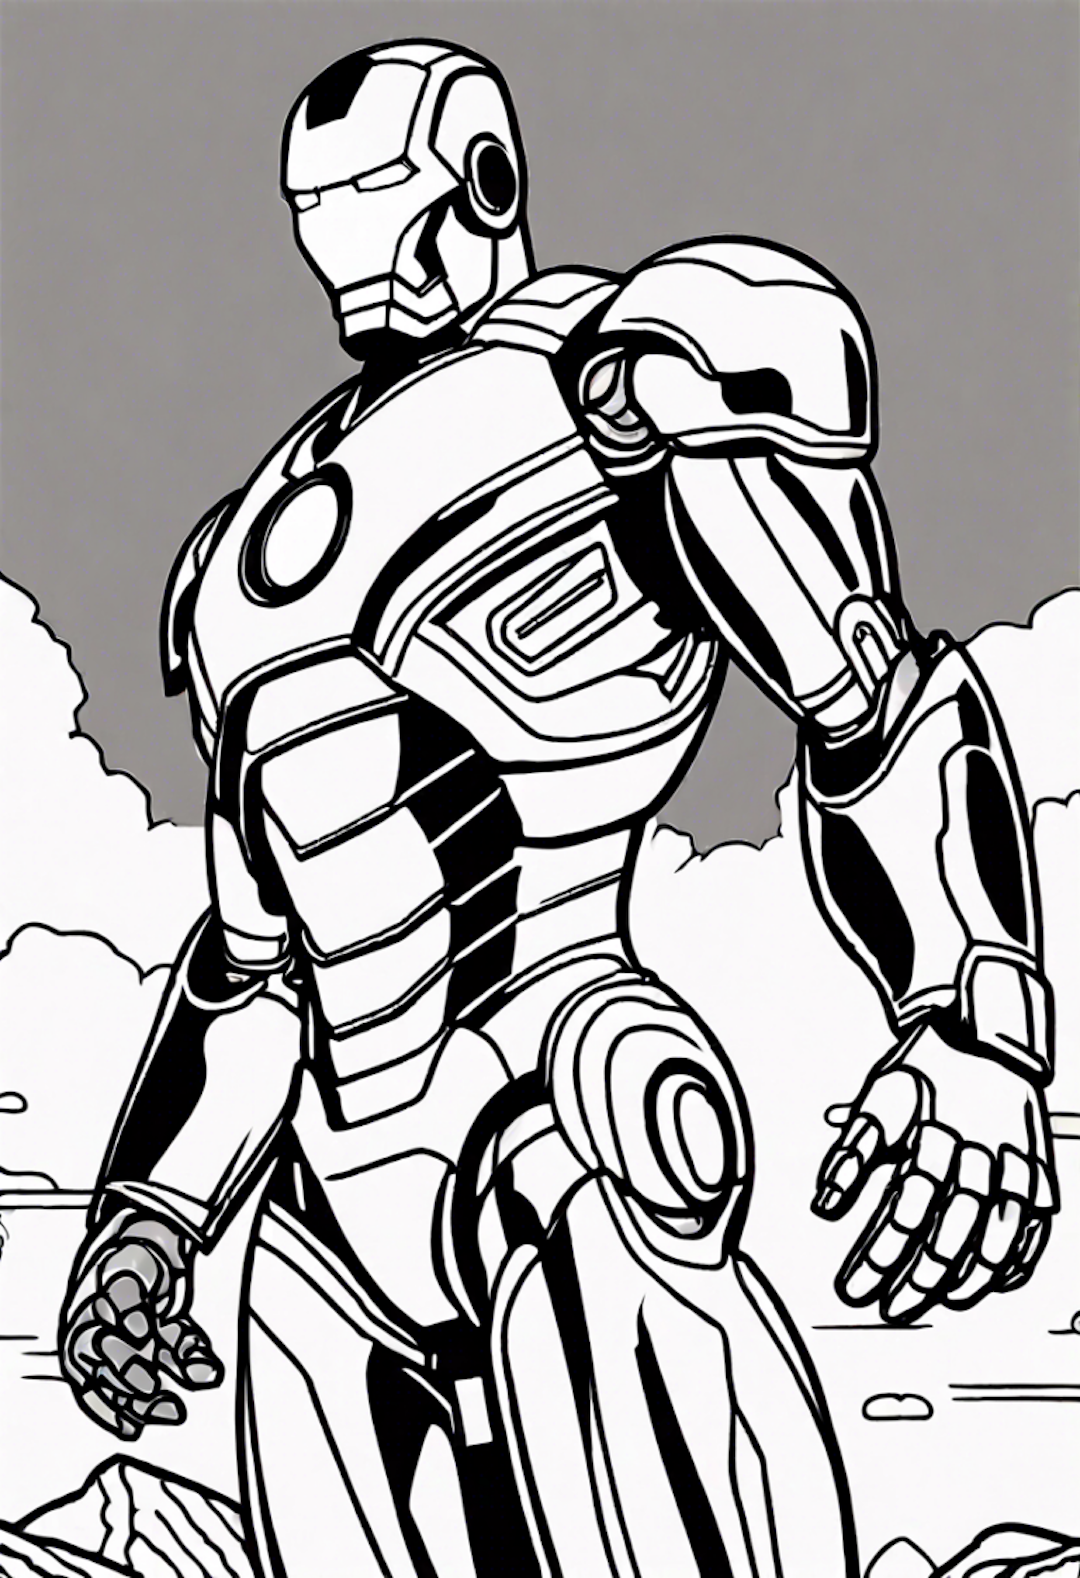 Iron Man in Action Coloring Page coloring pages